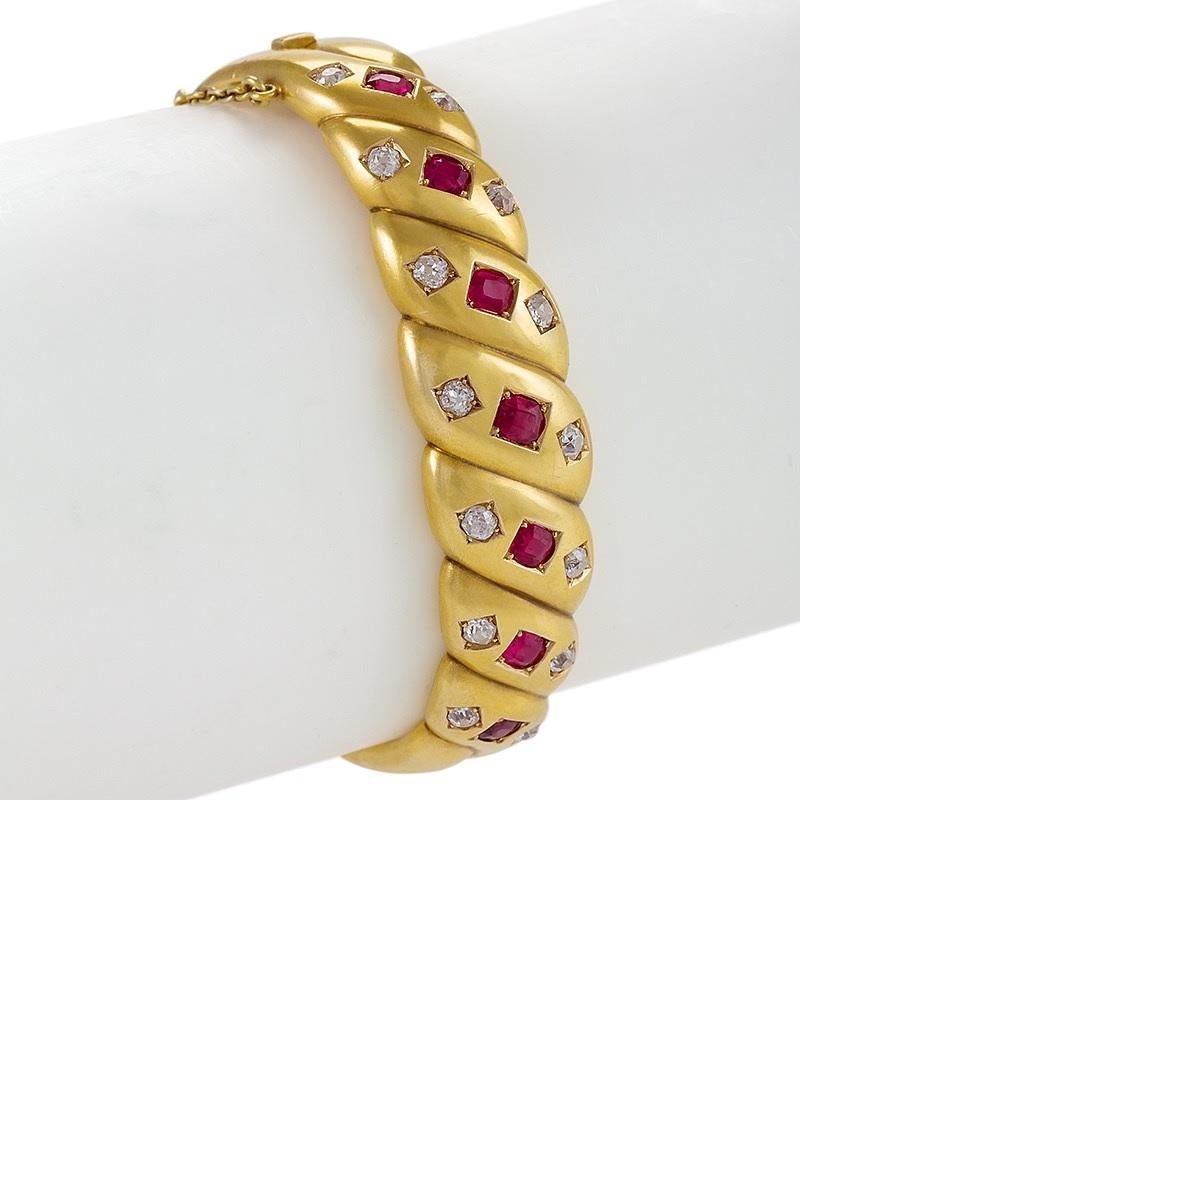 Late Victorian Victorian Gold Bangle Bracelet with Diamonds and Rubies